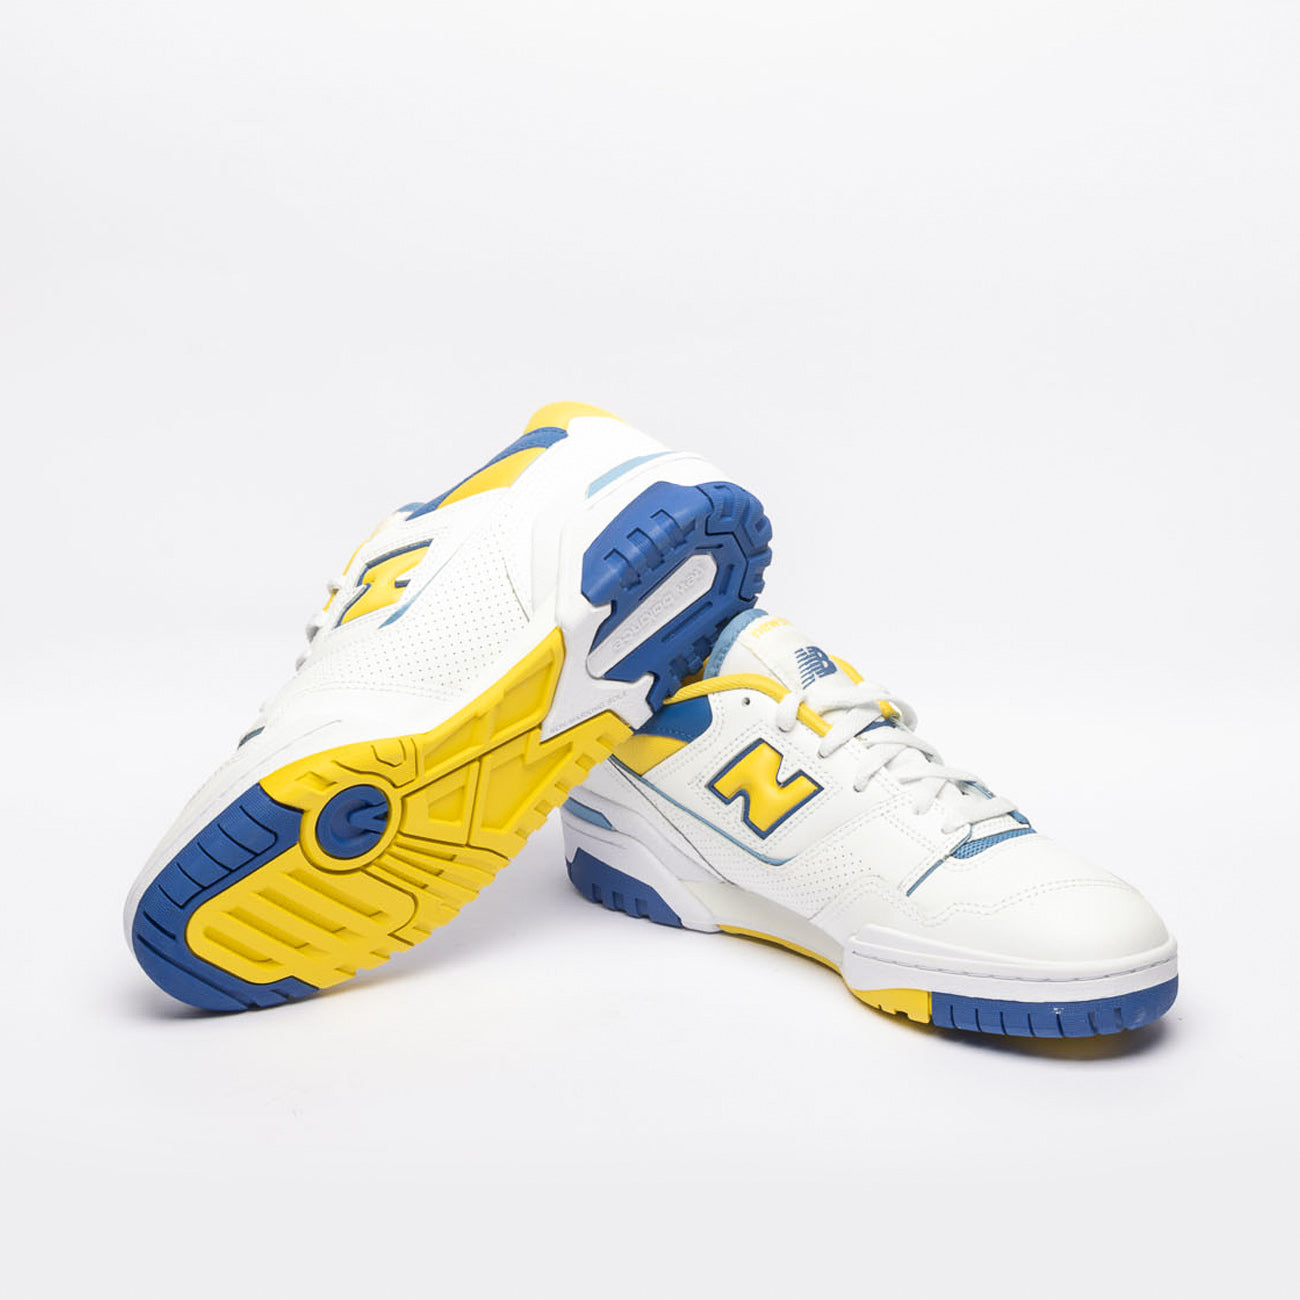 New Balance 550 low basketball sneaker in white leather with yellow accent